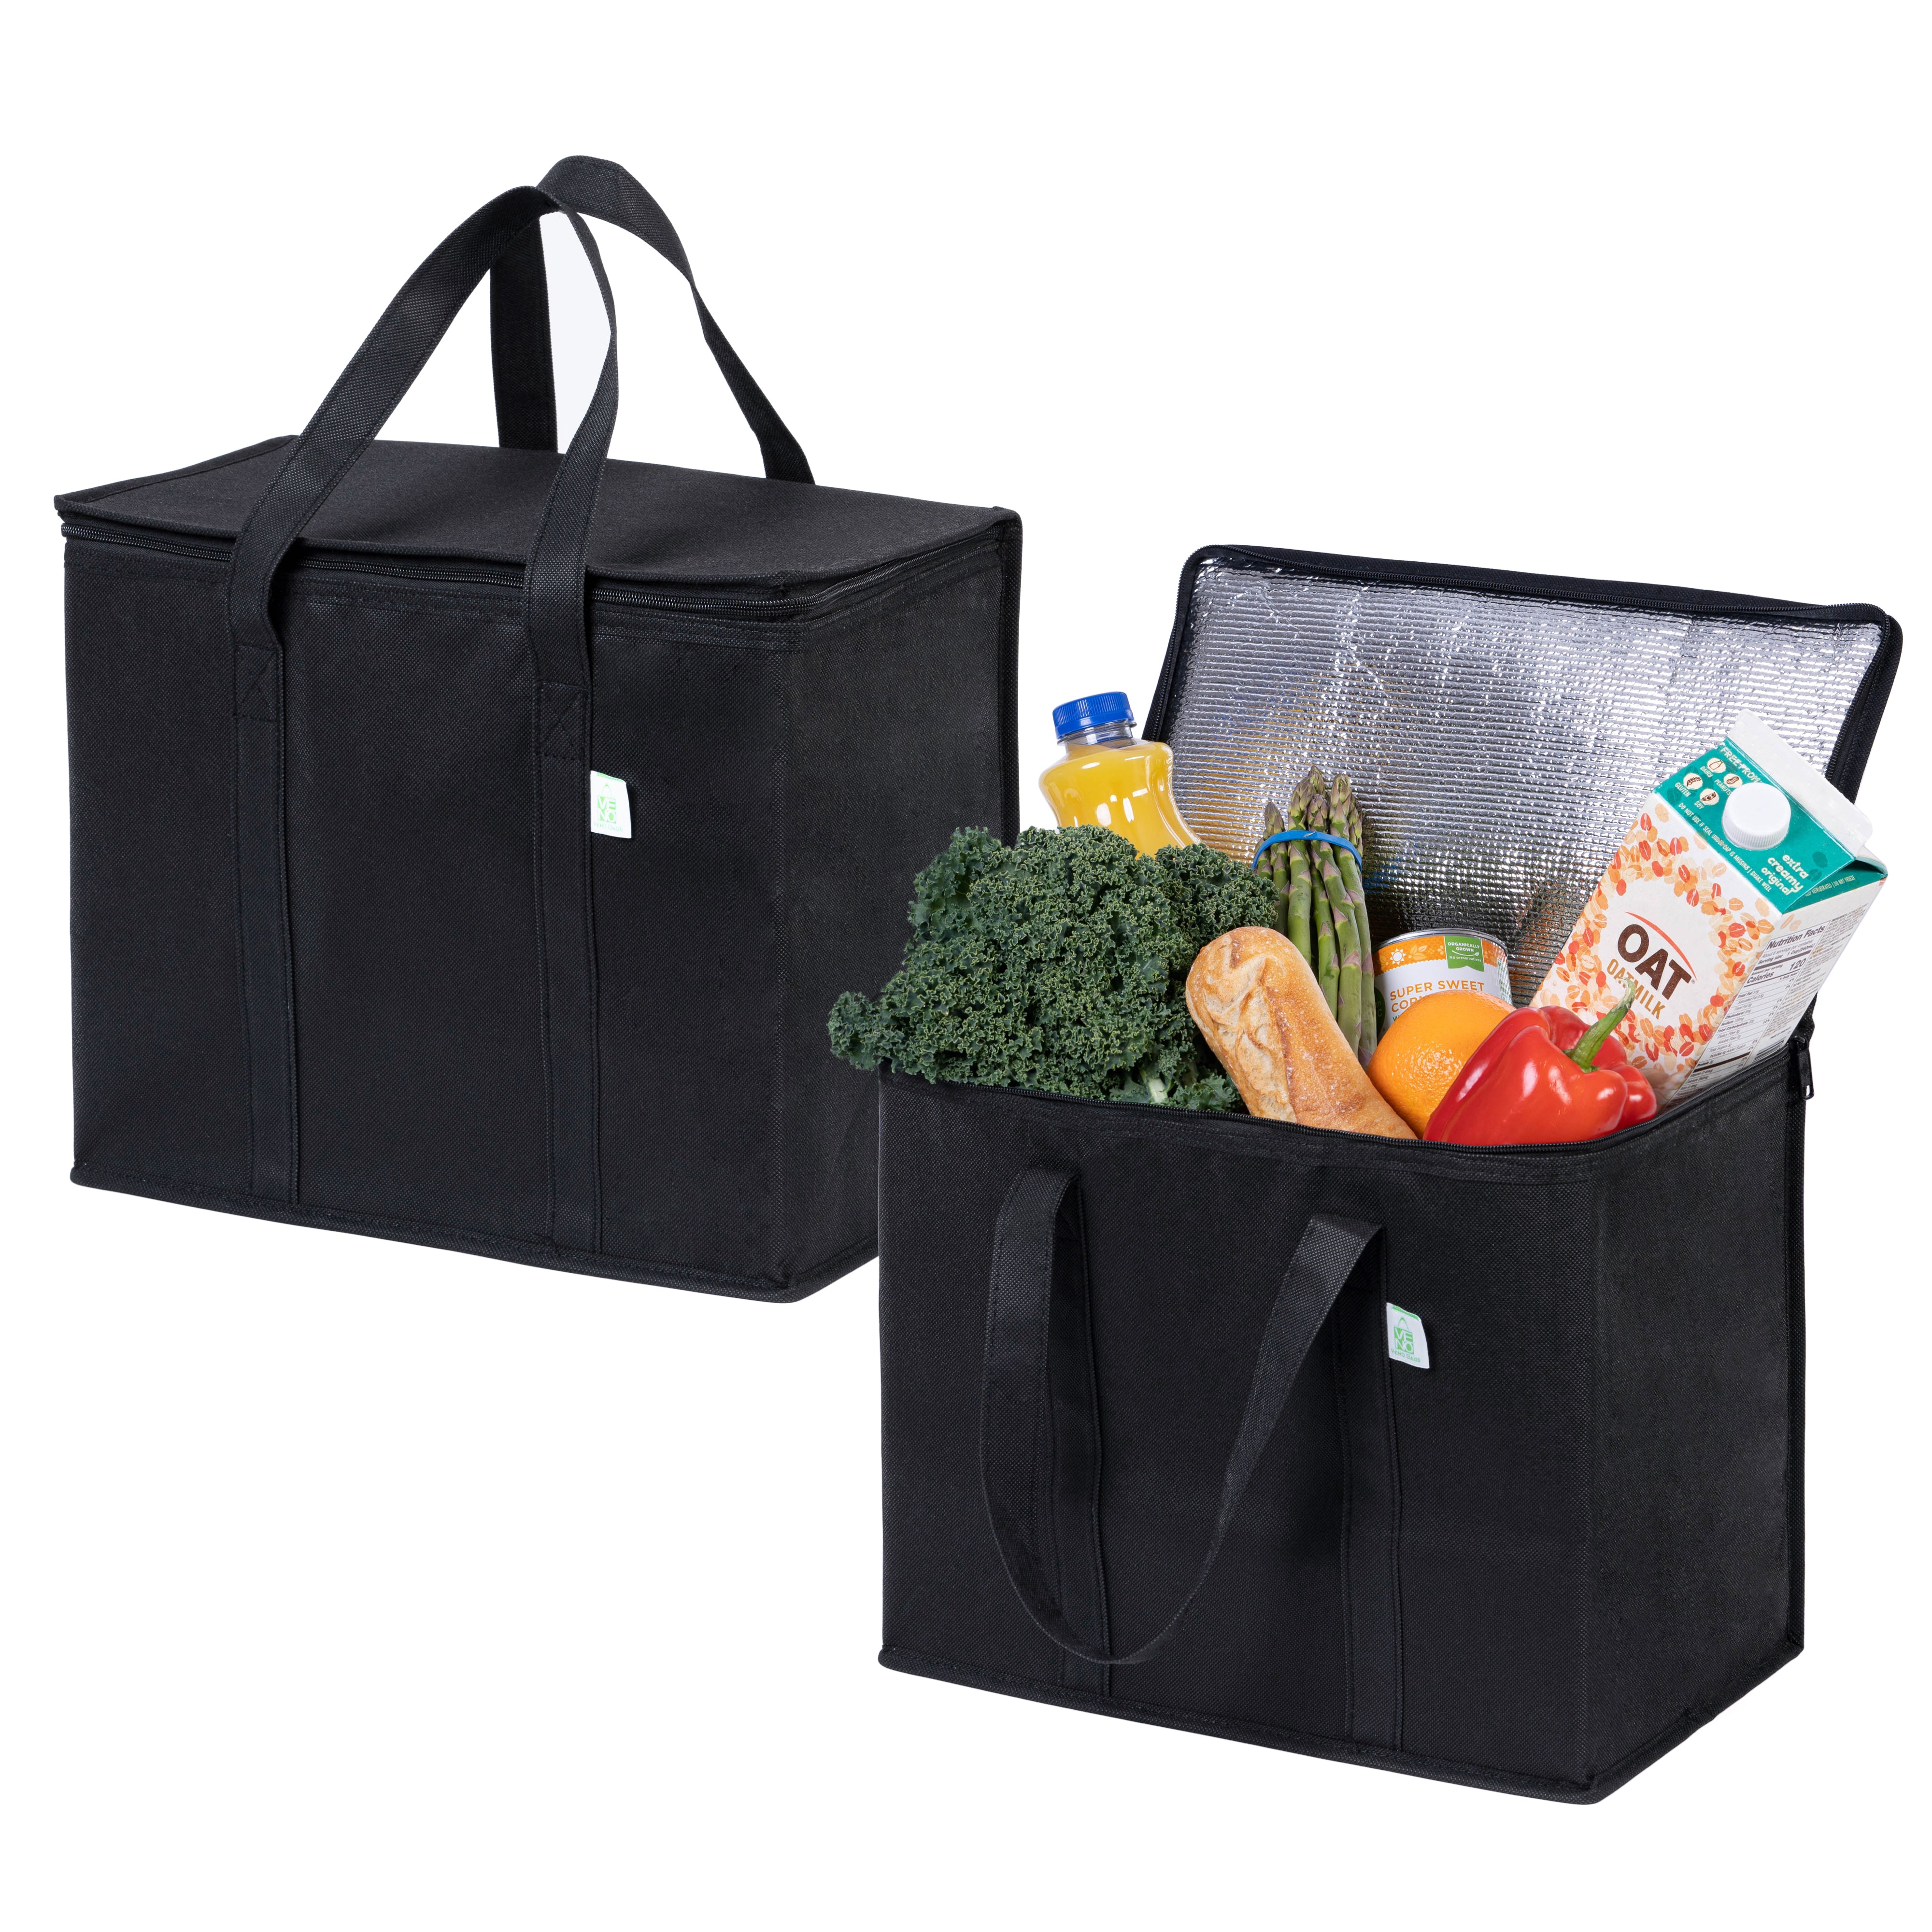 Reusable Grocery Shopping Bags Large Foldable,Winter snow forest